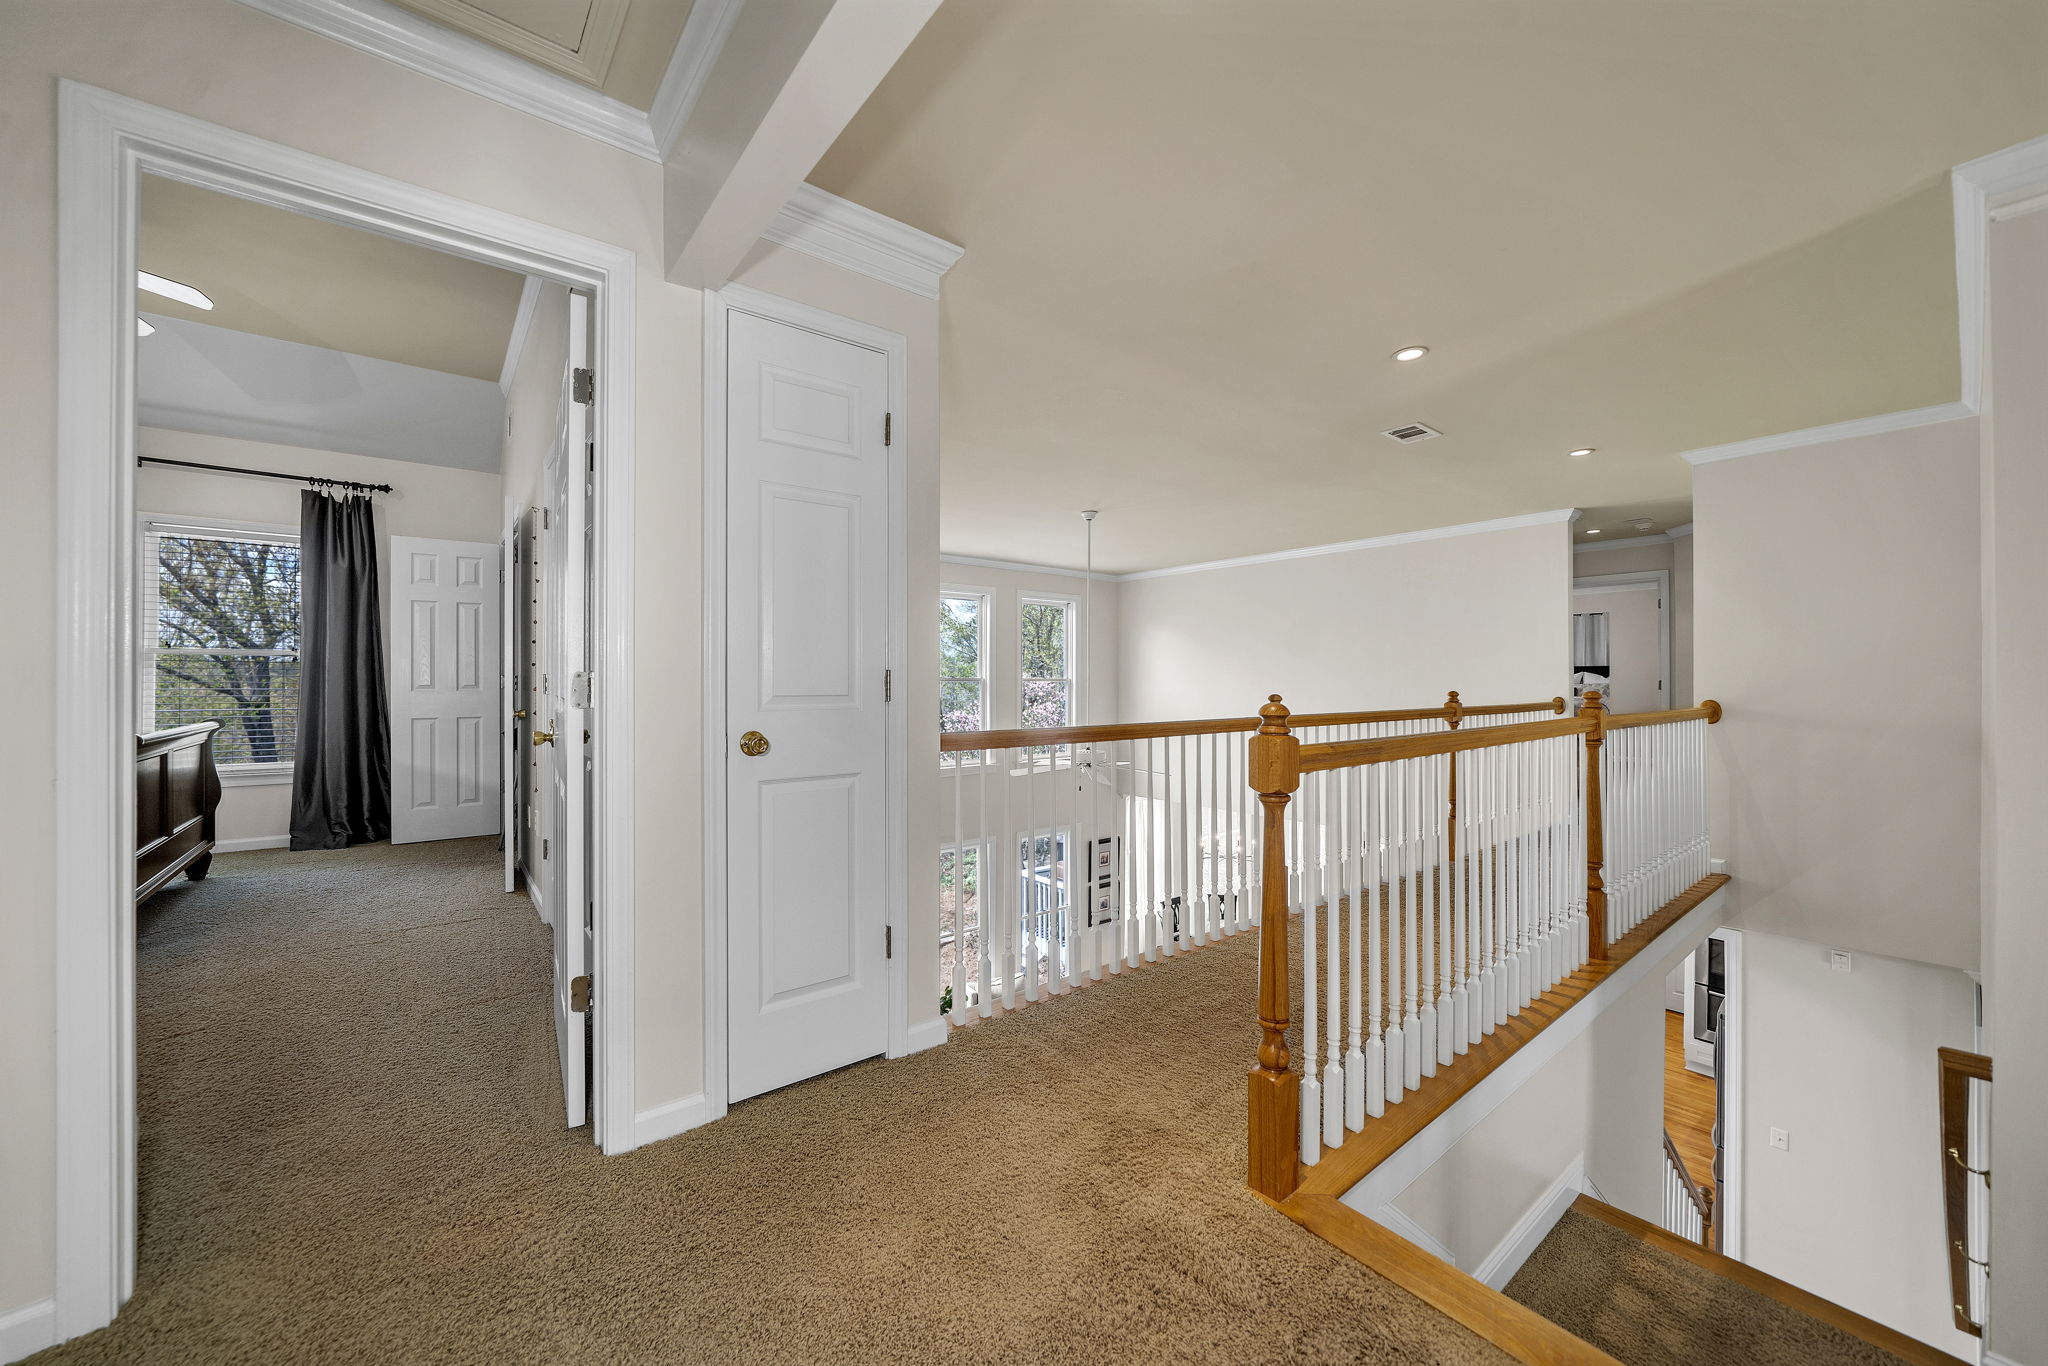 The double stairway opens up to the foyer and greatroom.